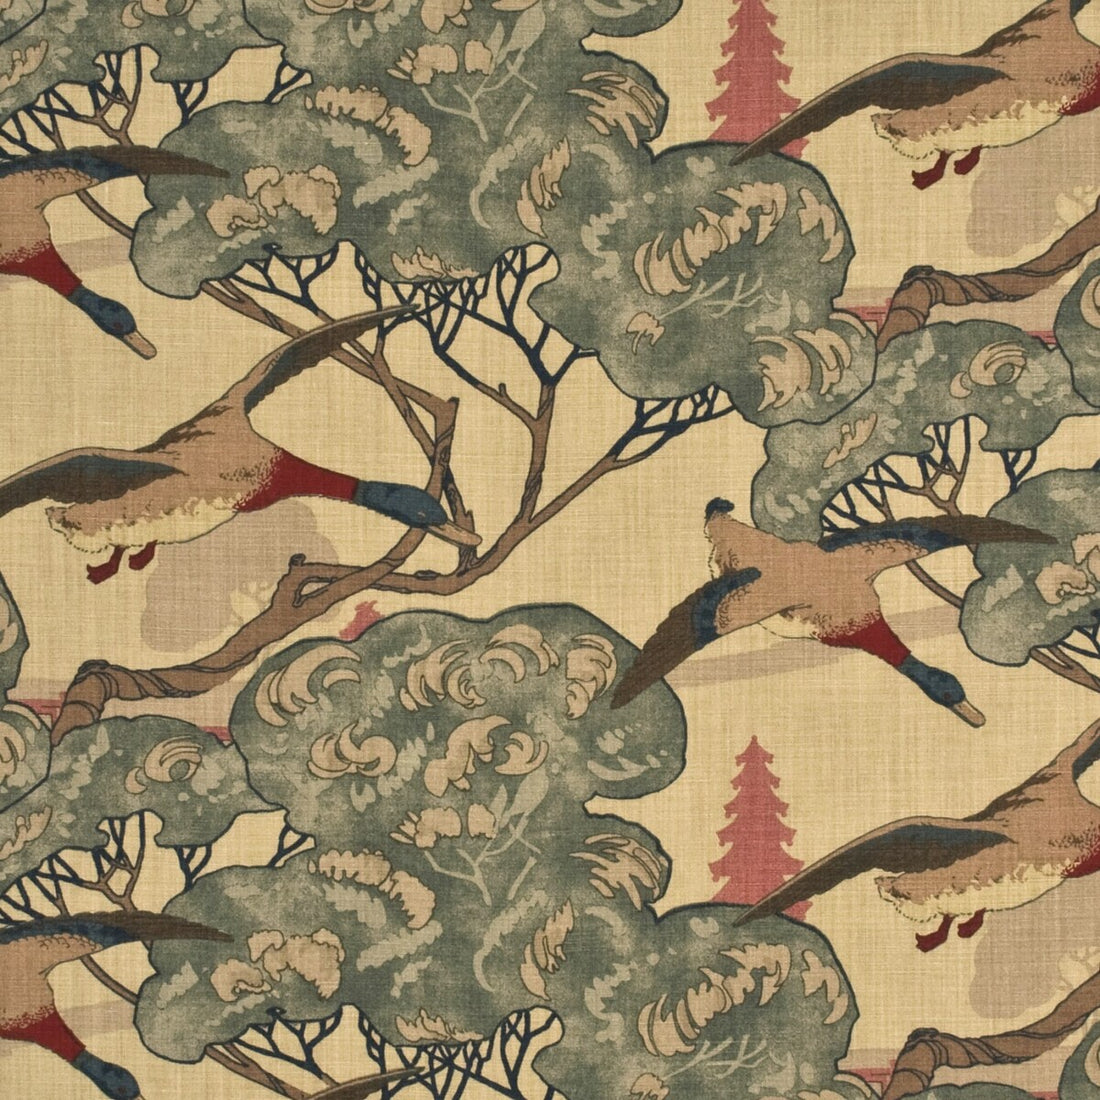 Flying Ducks fabric in camel/grey color - pattern FD205.L18.0 - by Mulberry in the Mulberry Best Of collection